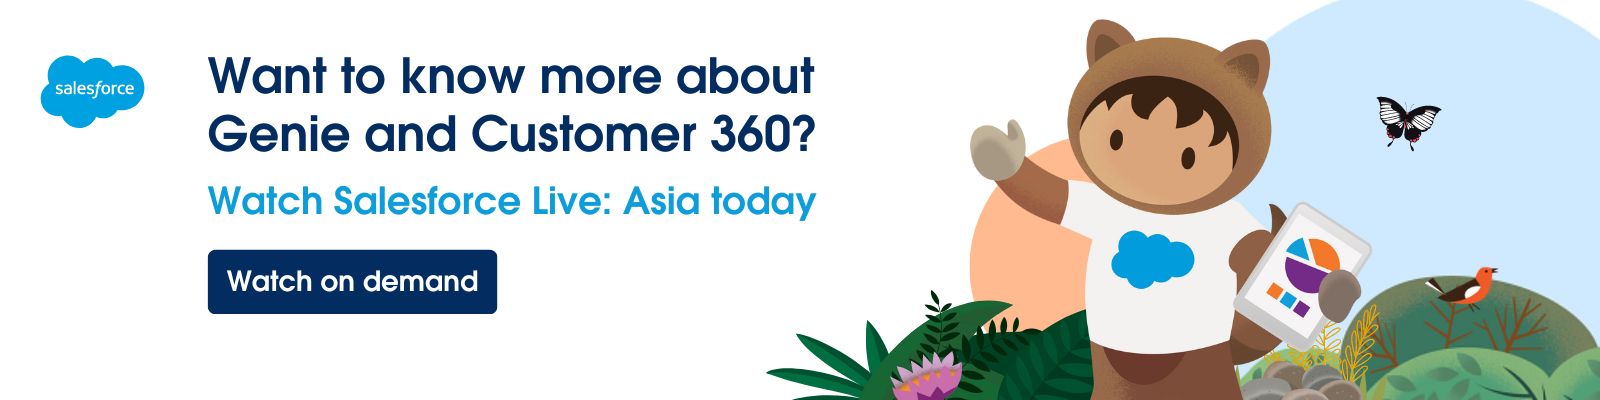 Find out more about Salesforce Genie and Customer 360. Watch Salesforce Live: Asia on demand.